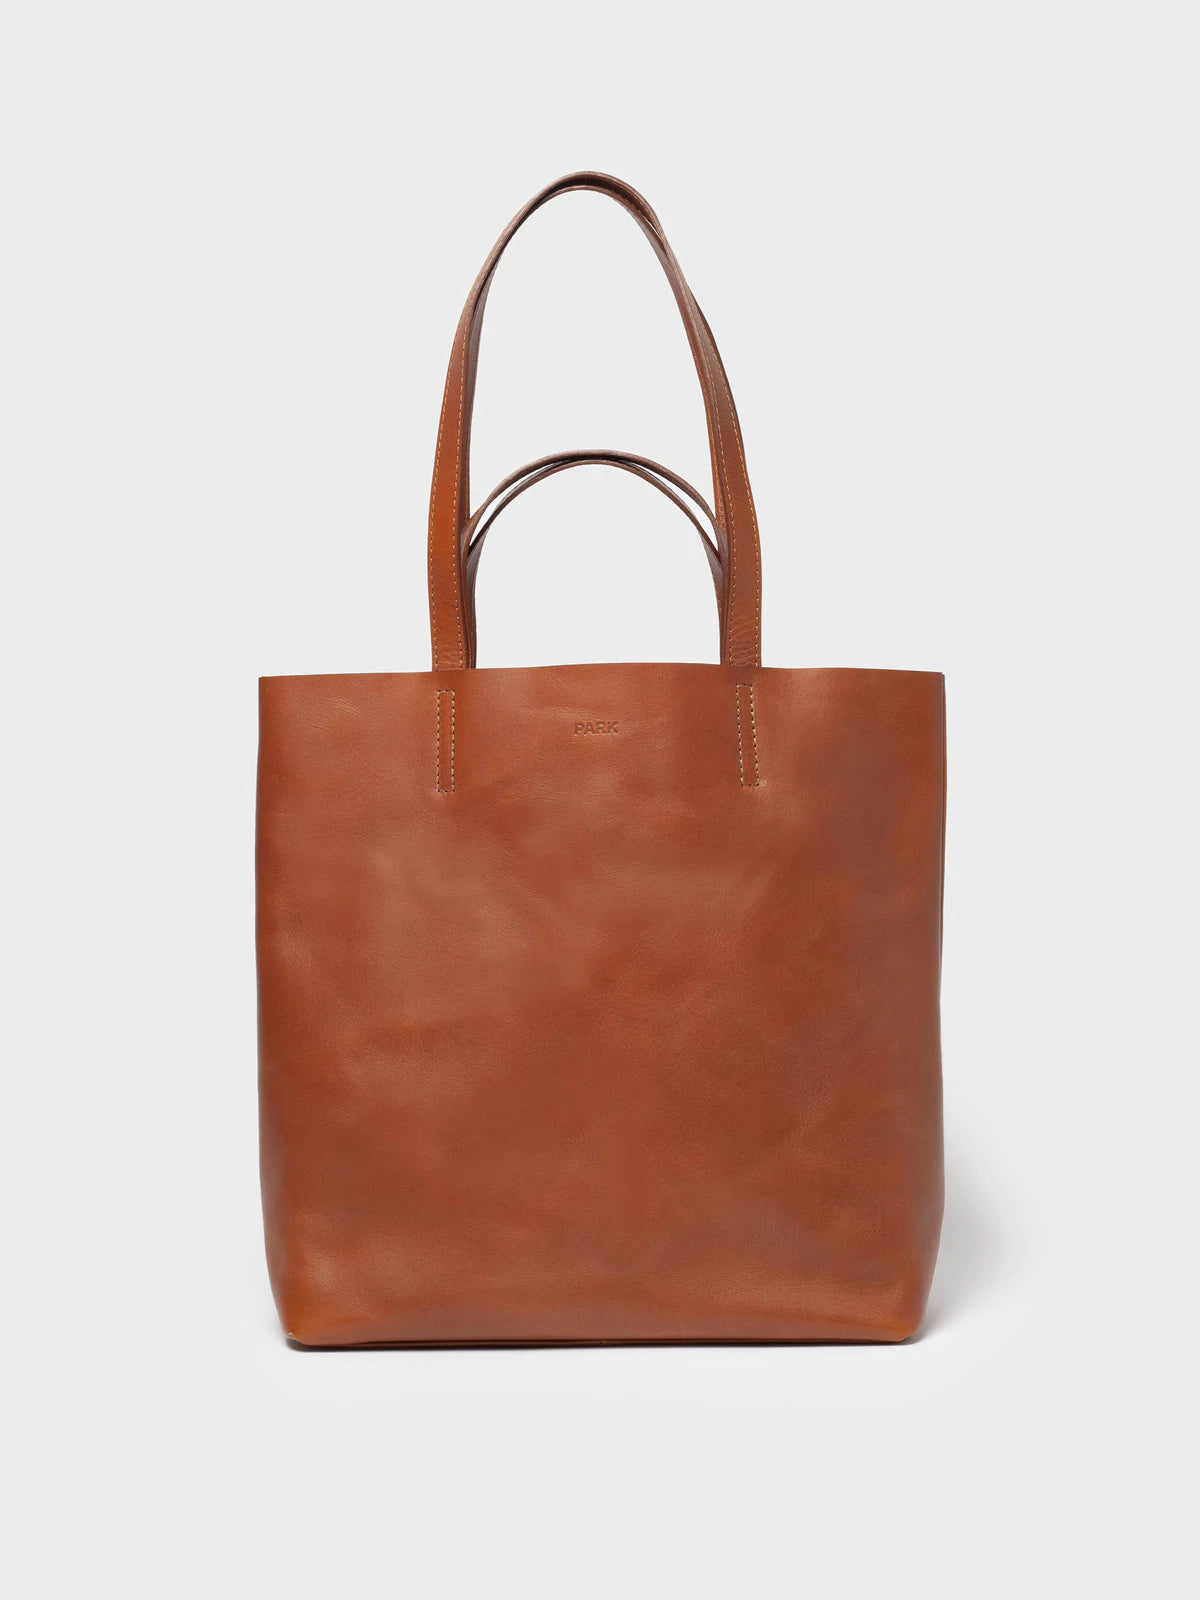 TB08 TOTE BAG WITH 4 STRAPS - BROWN